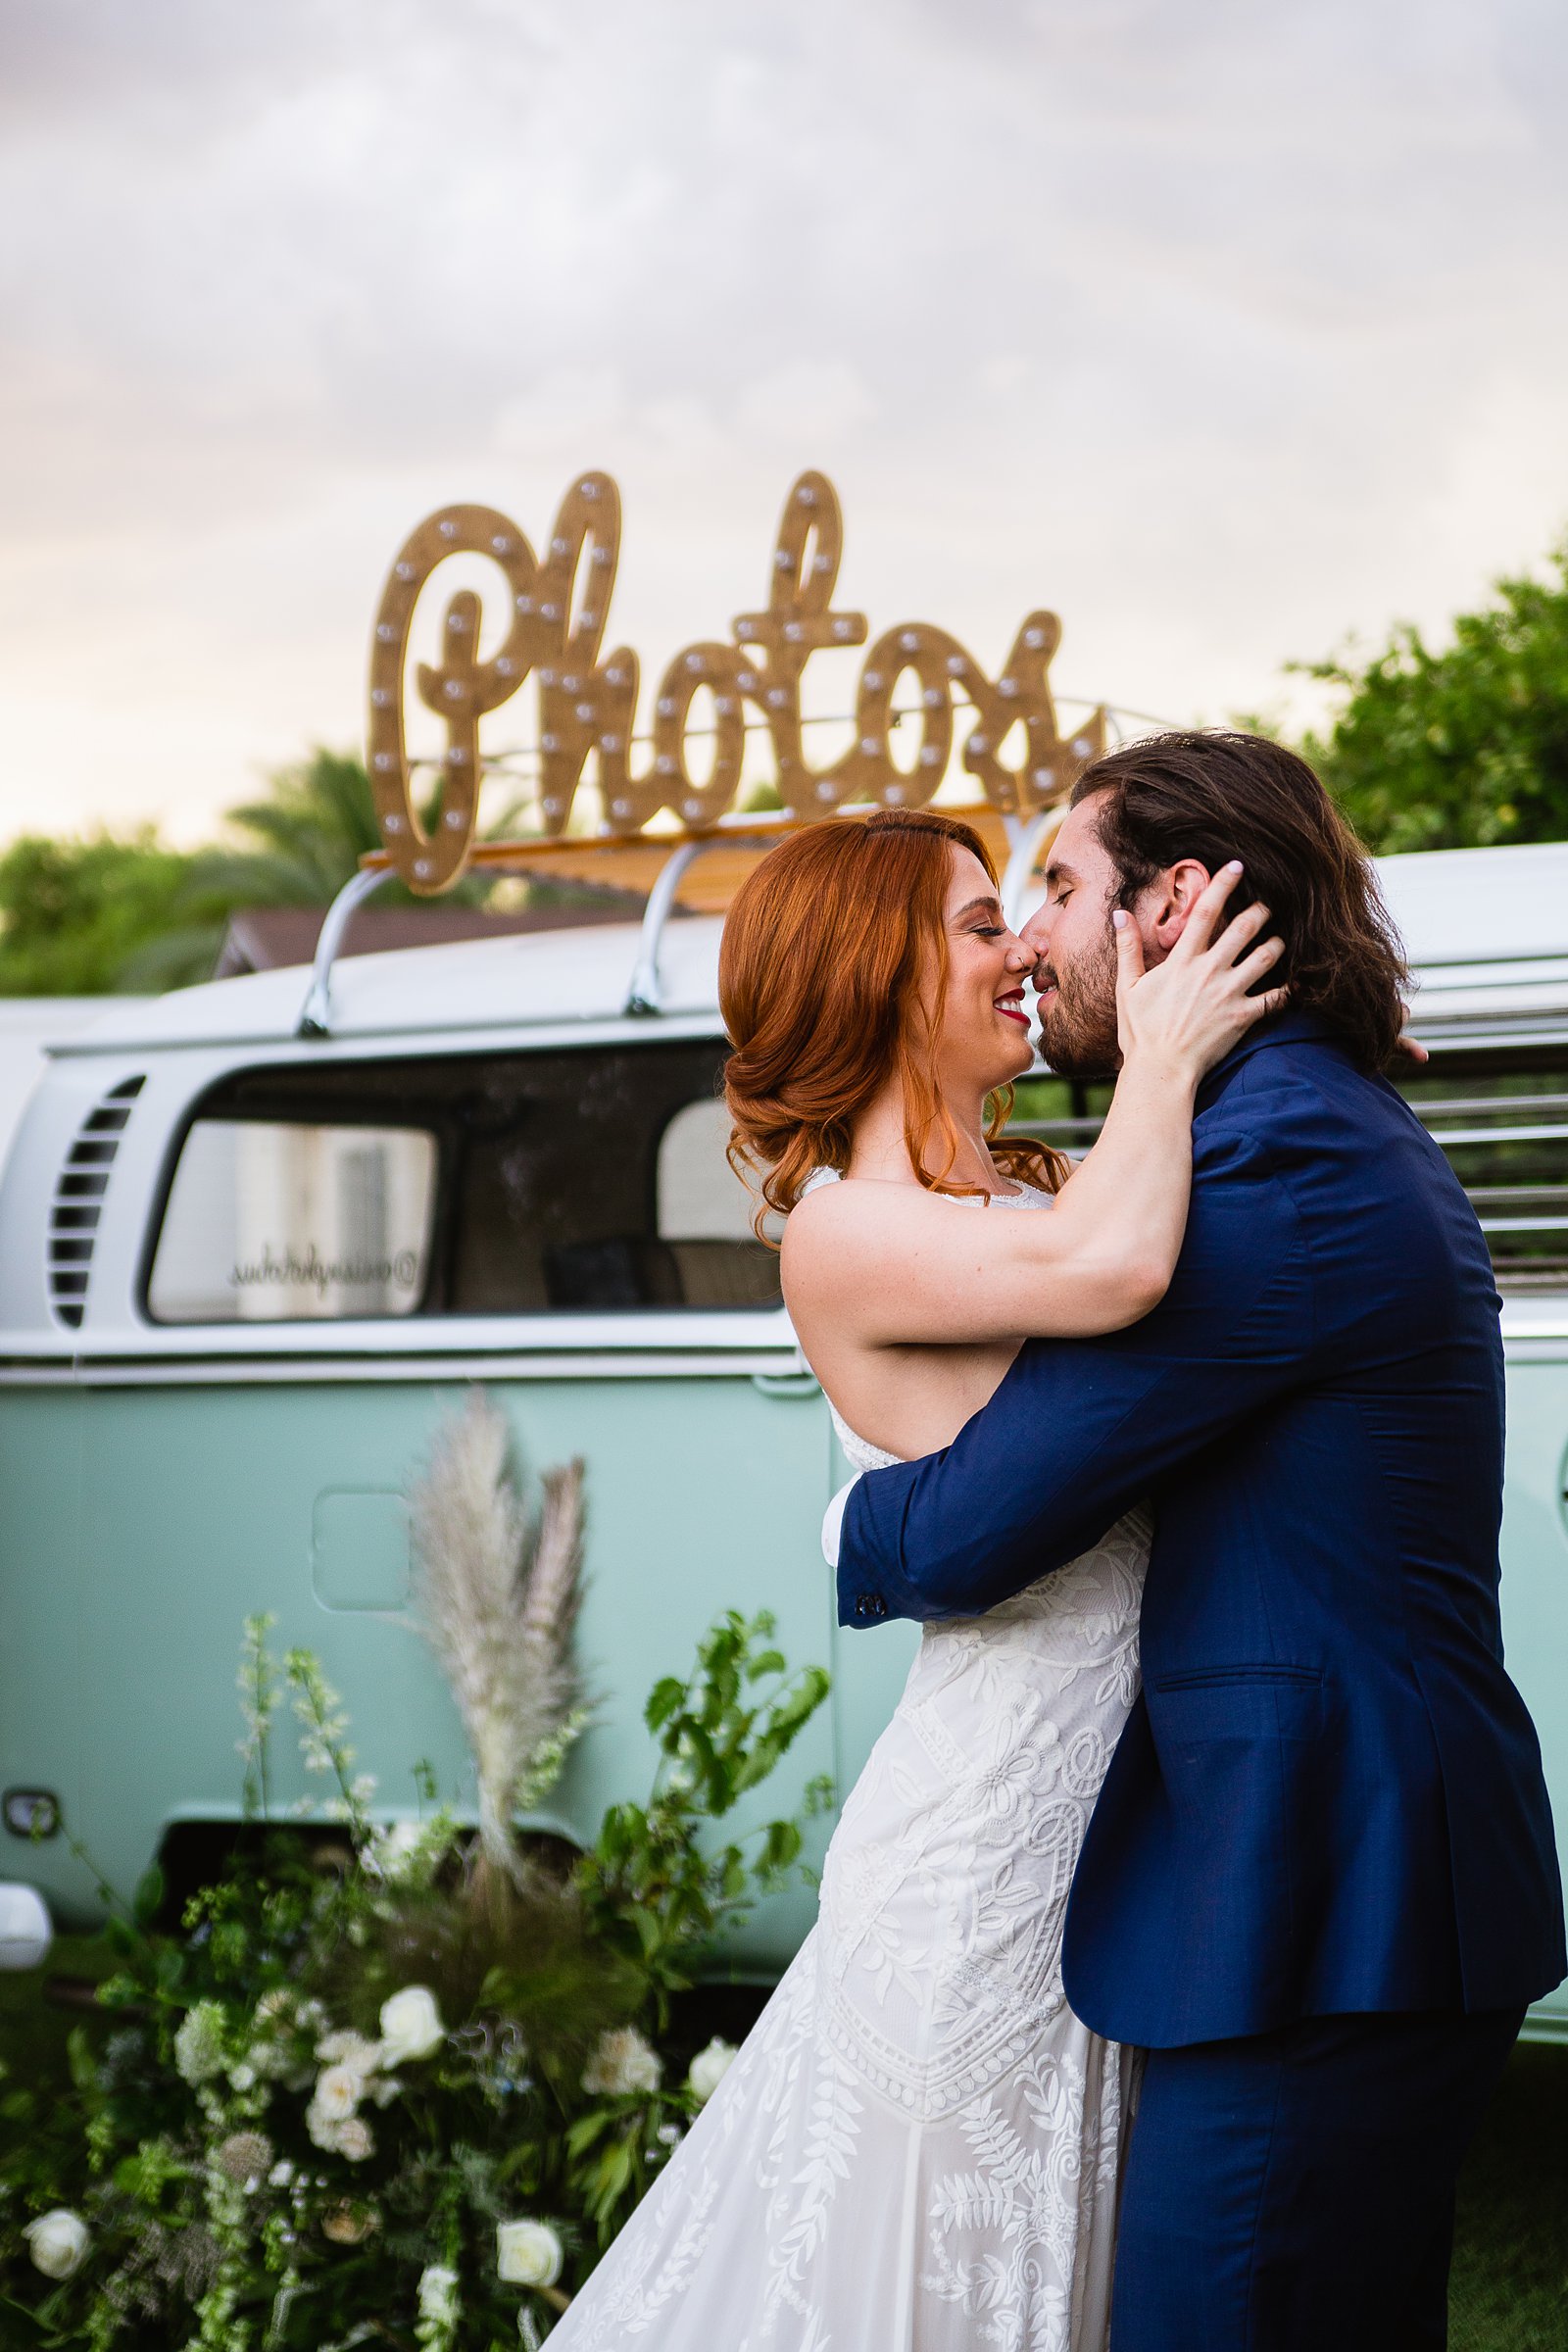 Bride and groom together with VW Bus photo booth at Gather Estate wedding by Arizona wedding photographers PMA Photography.